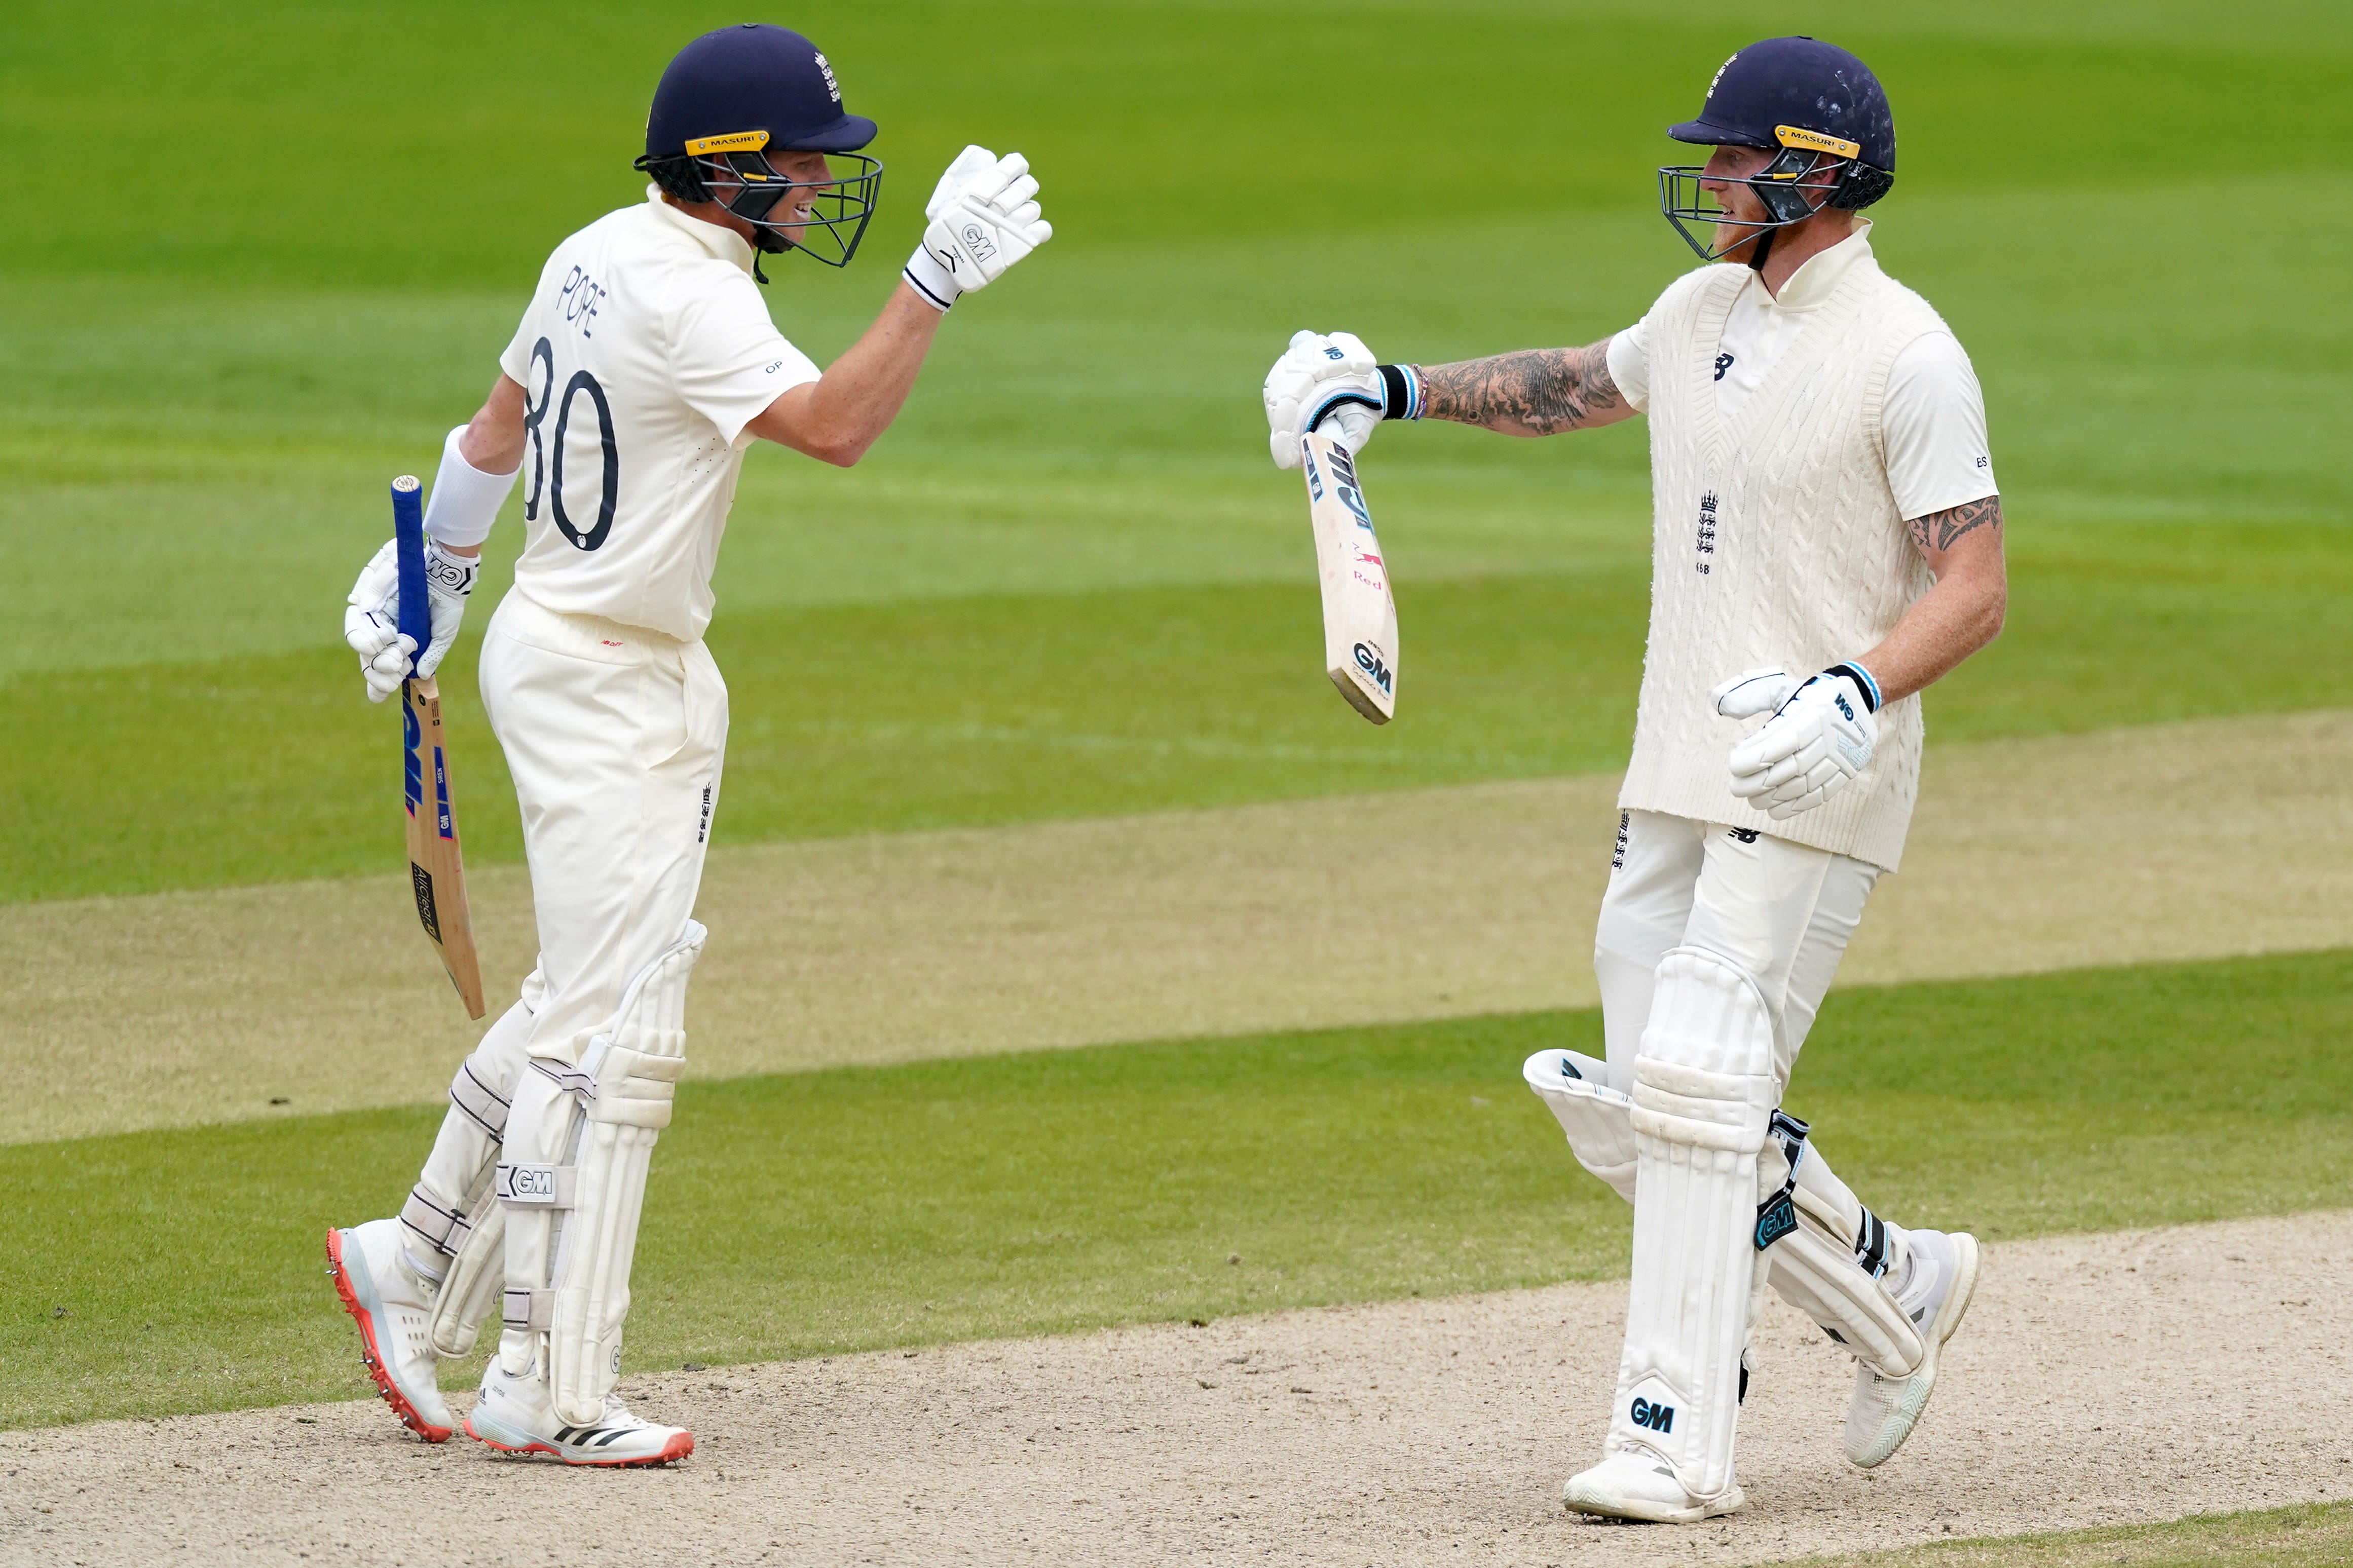 Has 'Bazball' taken hold in county cricket? What the numbers tell